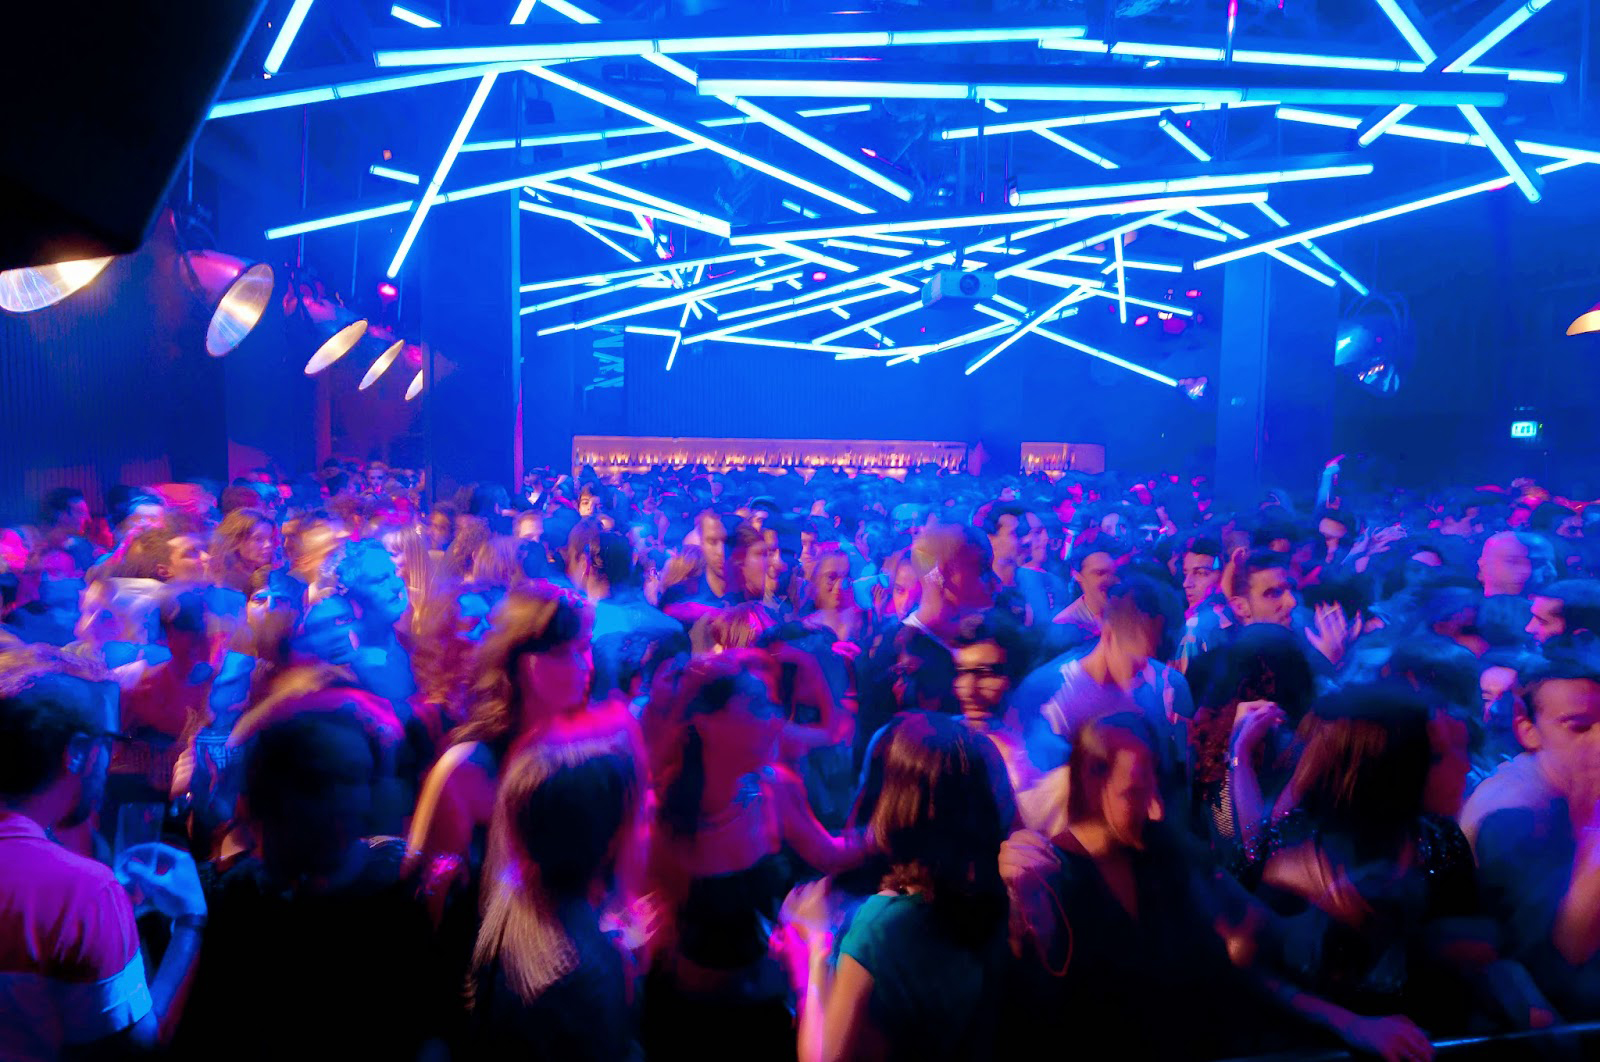 Top 10 Best EDM (Electronic Dance) Clubs in Miami [VIDEO] - Discotech